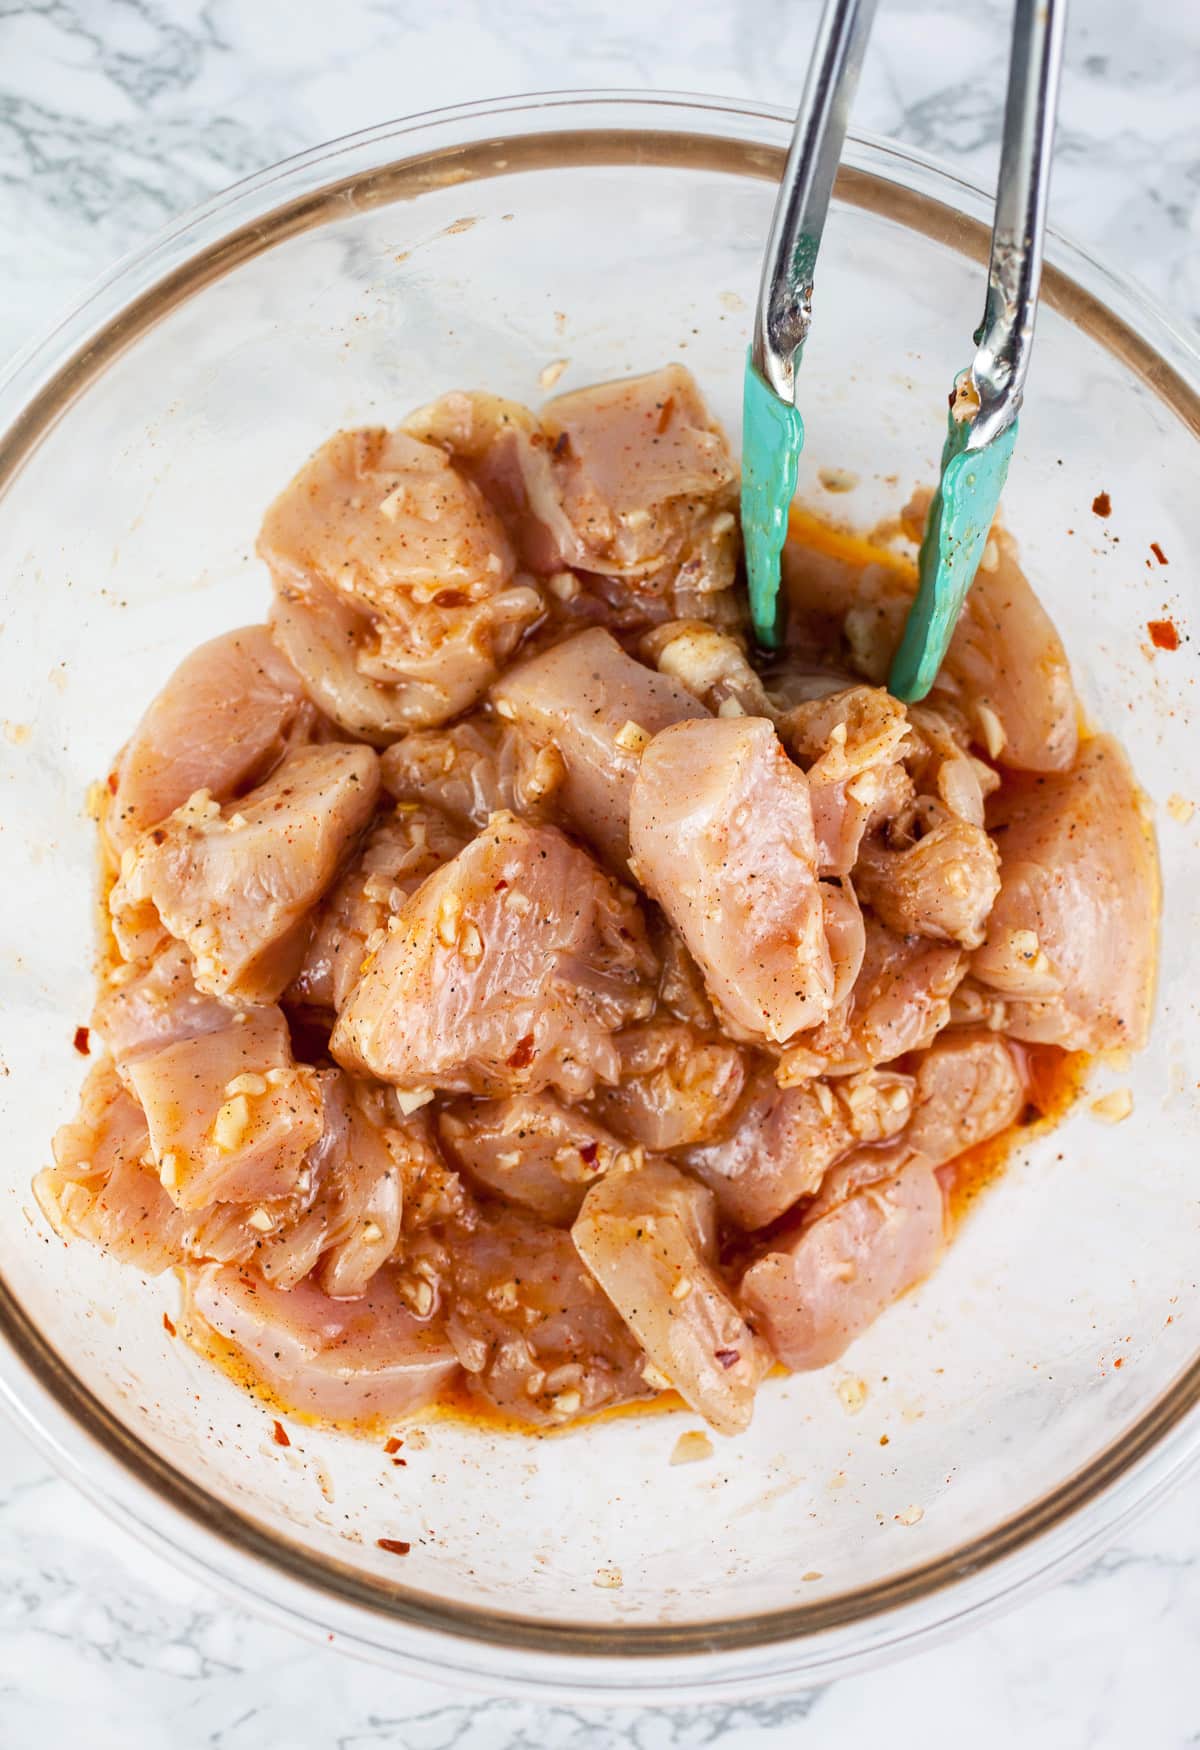 Chunks of chicken marinating in large glass bowl.